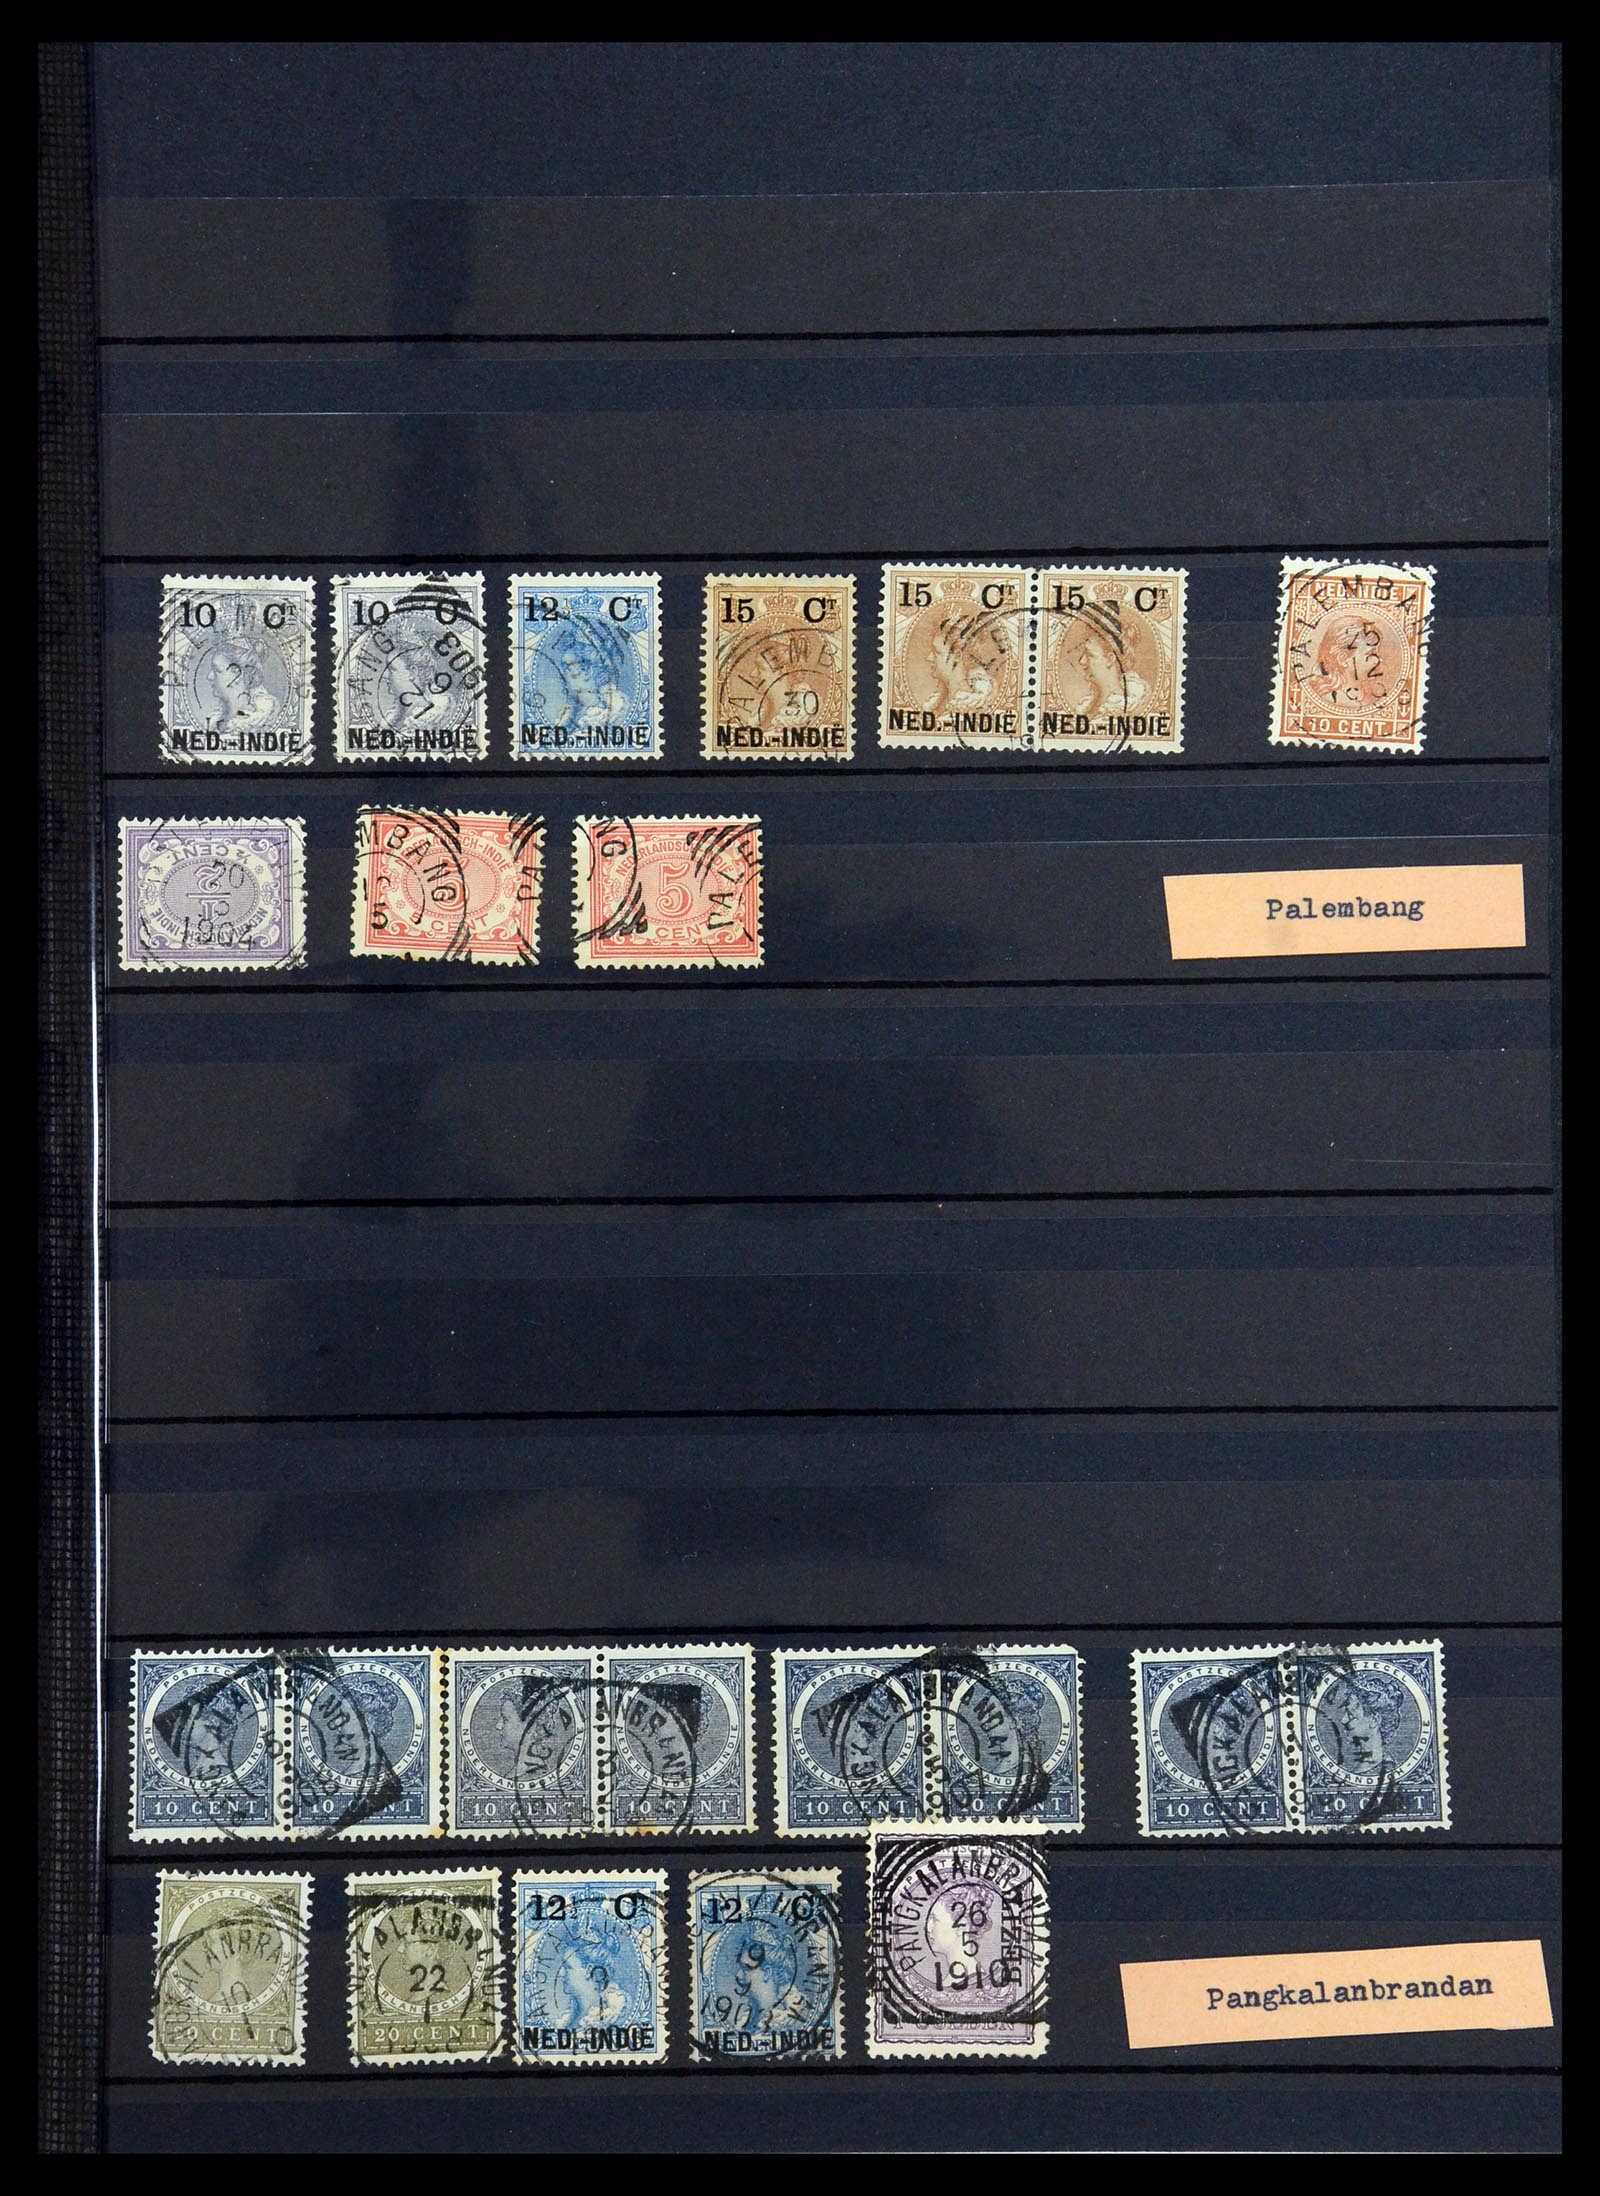 36371 037 - Stamp collection 36371 Dutch east Indies cancels.